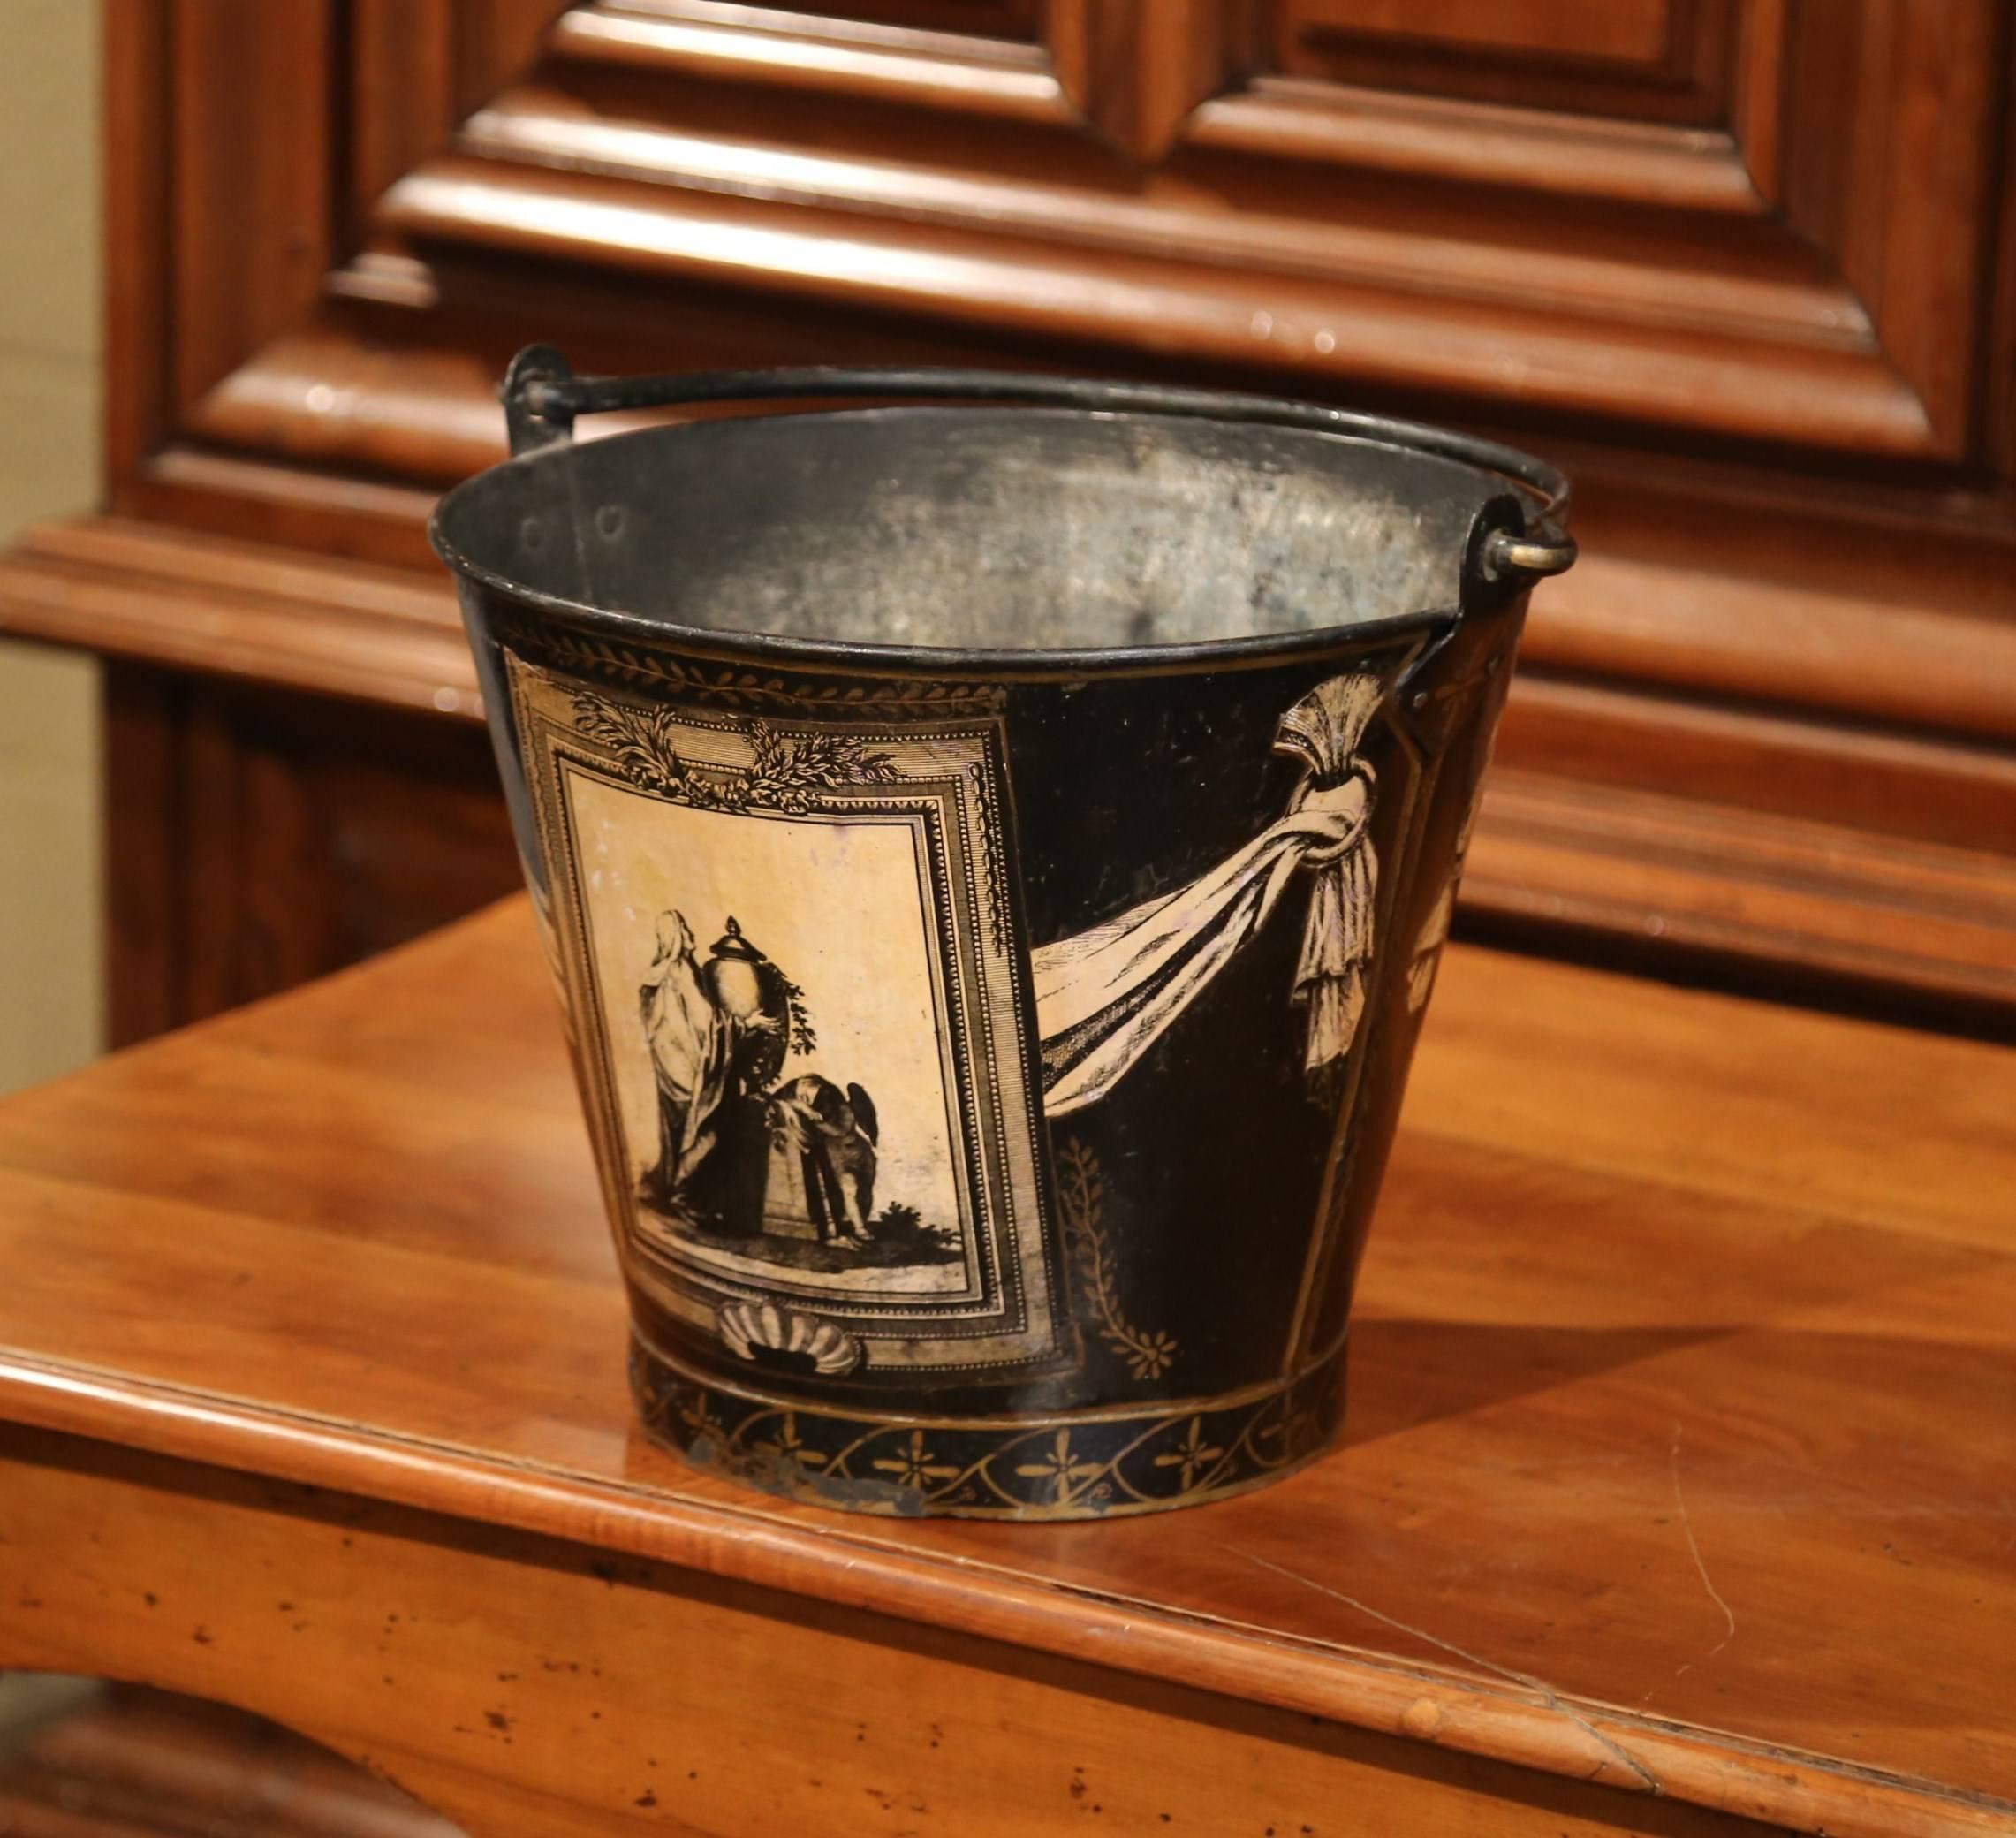 Crafted in Paris, circa 1860, the elegant antique bucket with iron handle, features hand painted mythological scenes on both sides embellished with garland and swag decor. The round basket is in excellent condition with a rich patinated black and